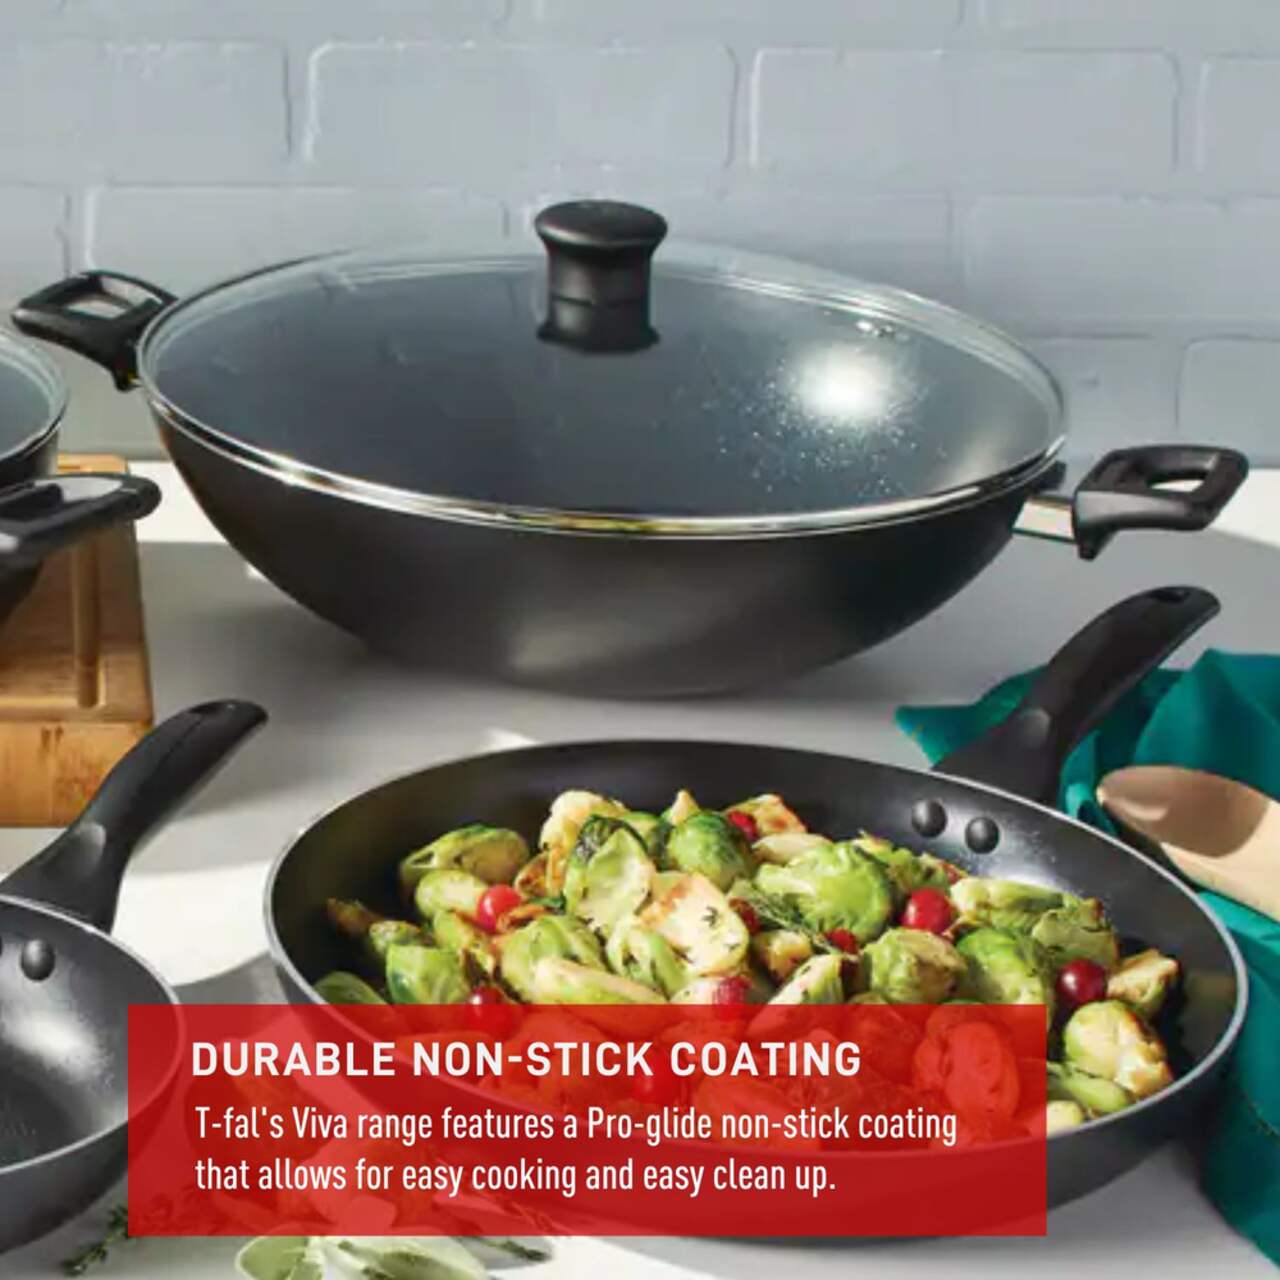 https://media-www.canadiantire.ca/product/living/kitchen/cookware/1425766/t-fal-jumbo-wok-36cm-with-glass-lid-3b7fe434-797b-4451-a0b8-e484388a0a92.png?imdensity=1&imwidth=1244&impolicy=mZoom